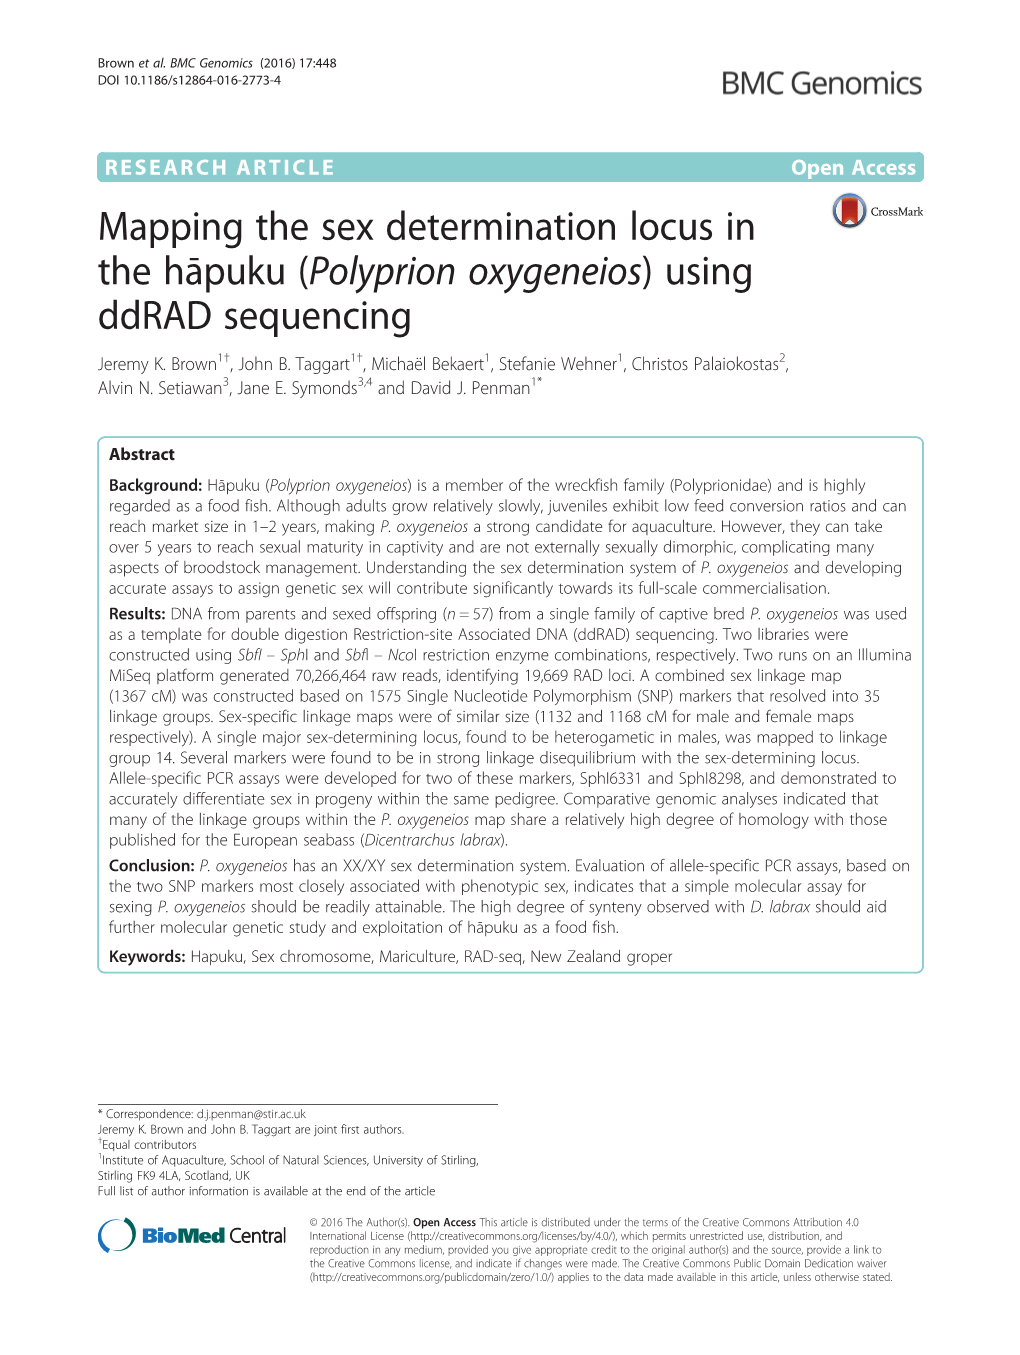 Mapping the Sex Determination Locus in the Hāpuku (Polyprion Oxygeneios) Using Ddrad Sequencing Jeremy K